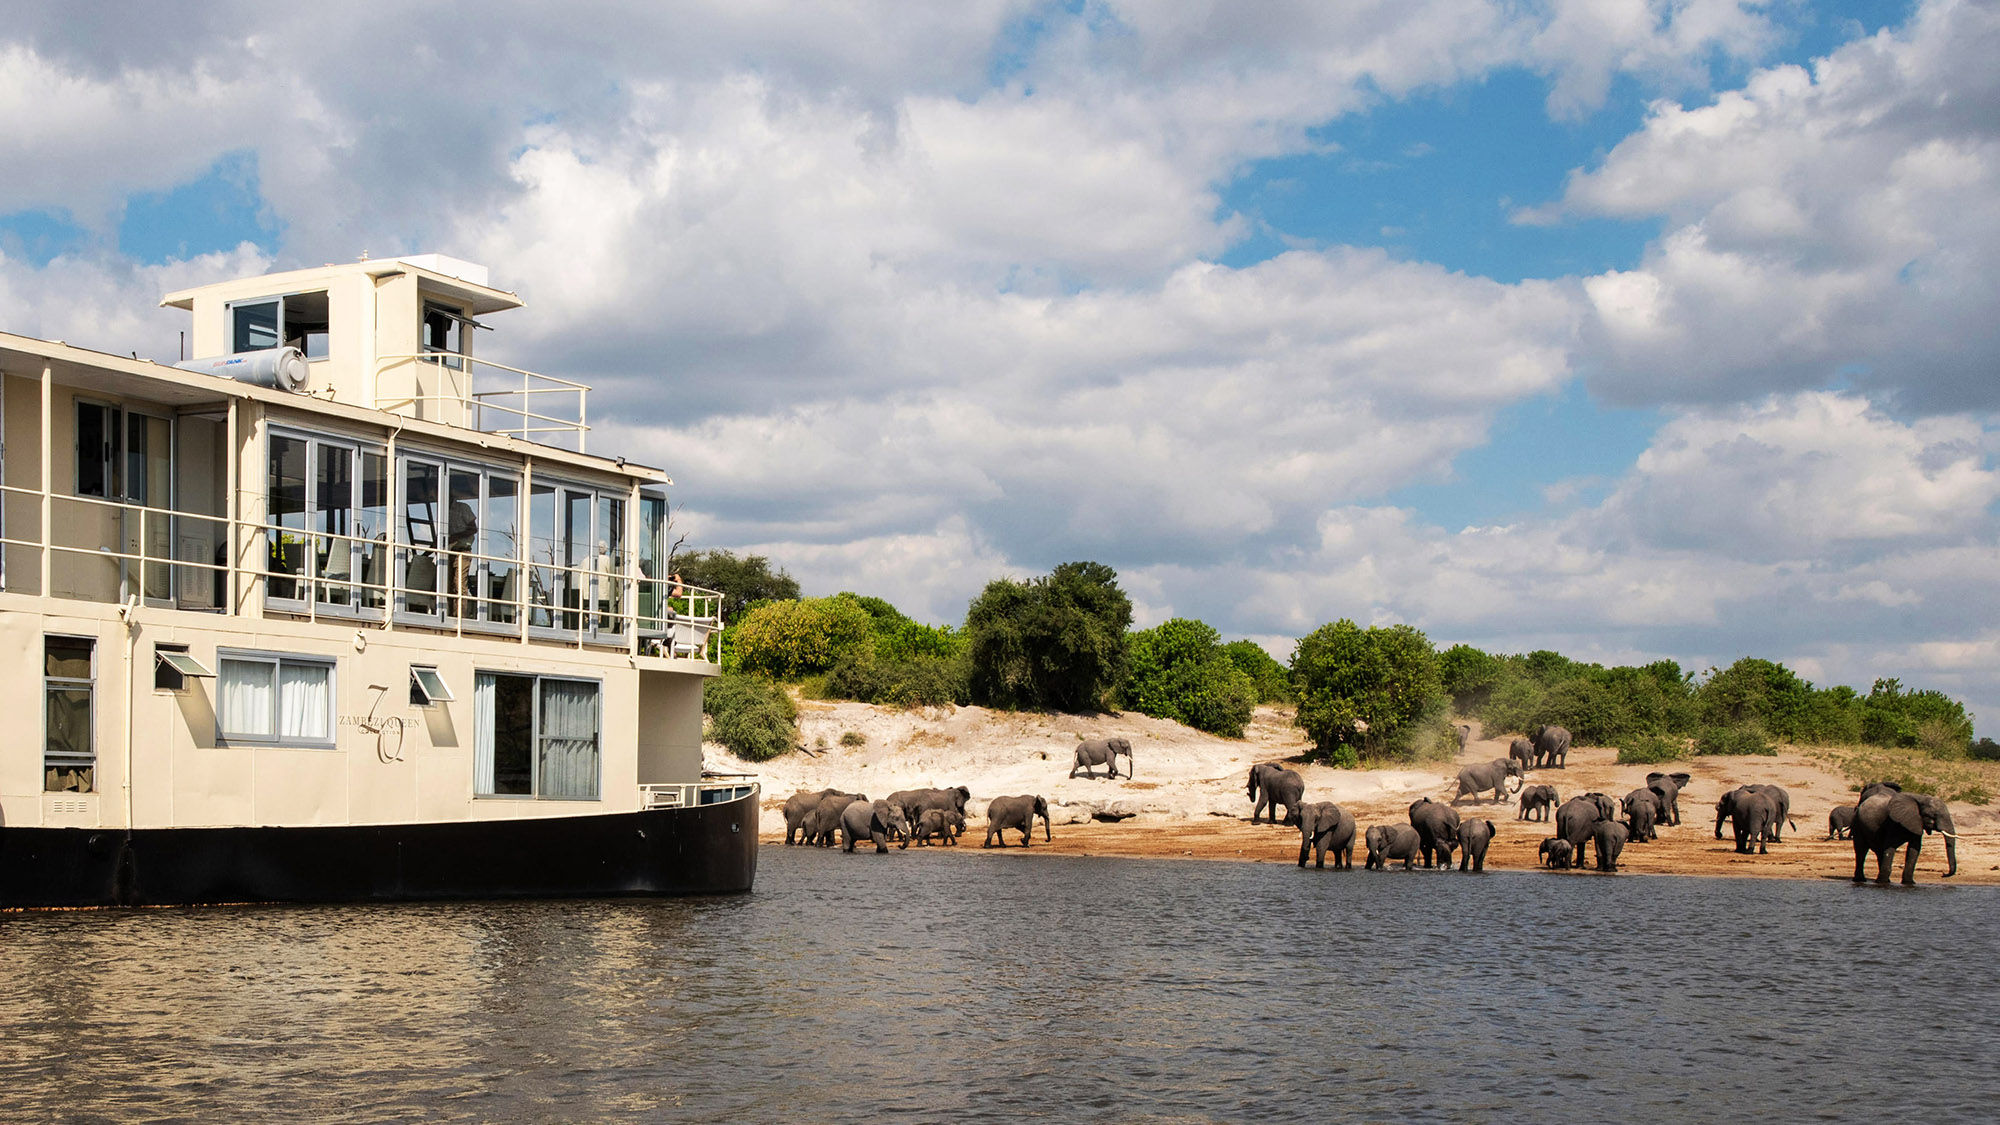 The Chobe Princess can accommodate 10 and can be booked for exclusive use.